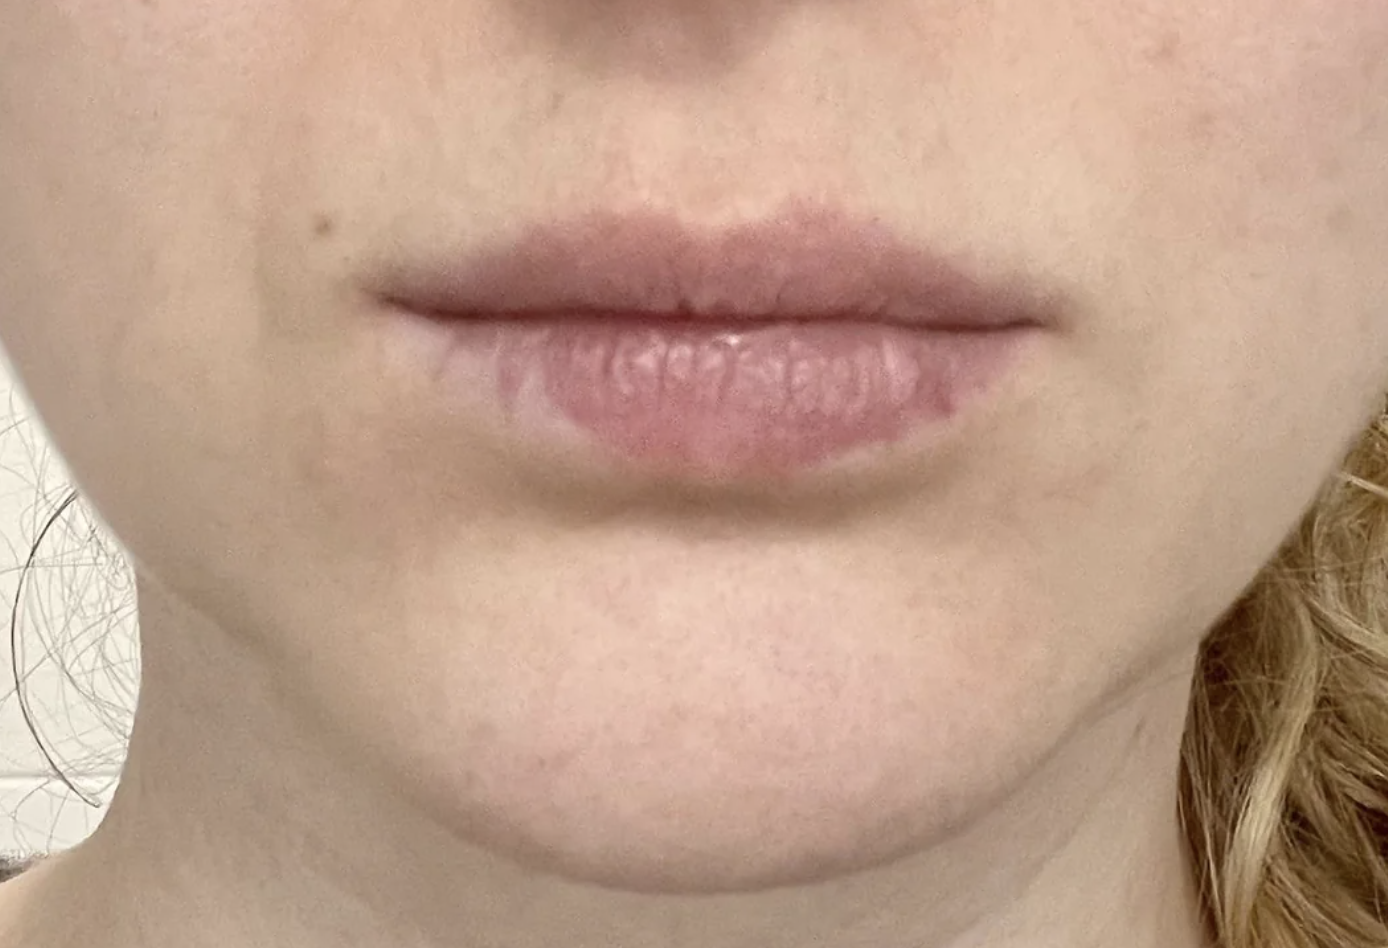 Close-up of a person&#x27;s lips showing a bottom lip with some missing pigmentation on the side and bottom